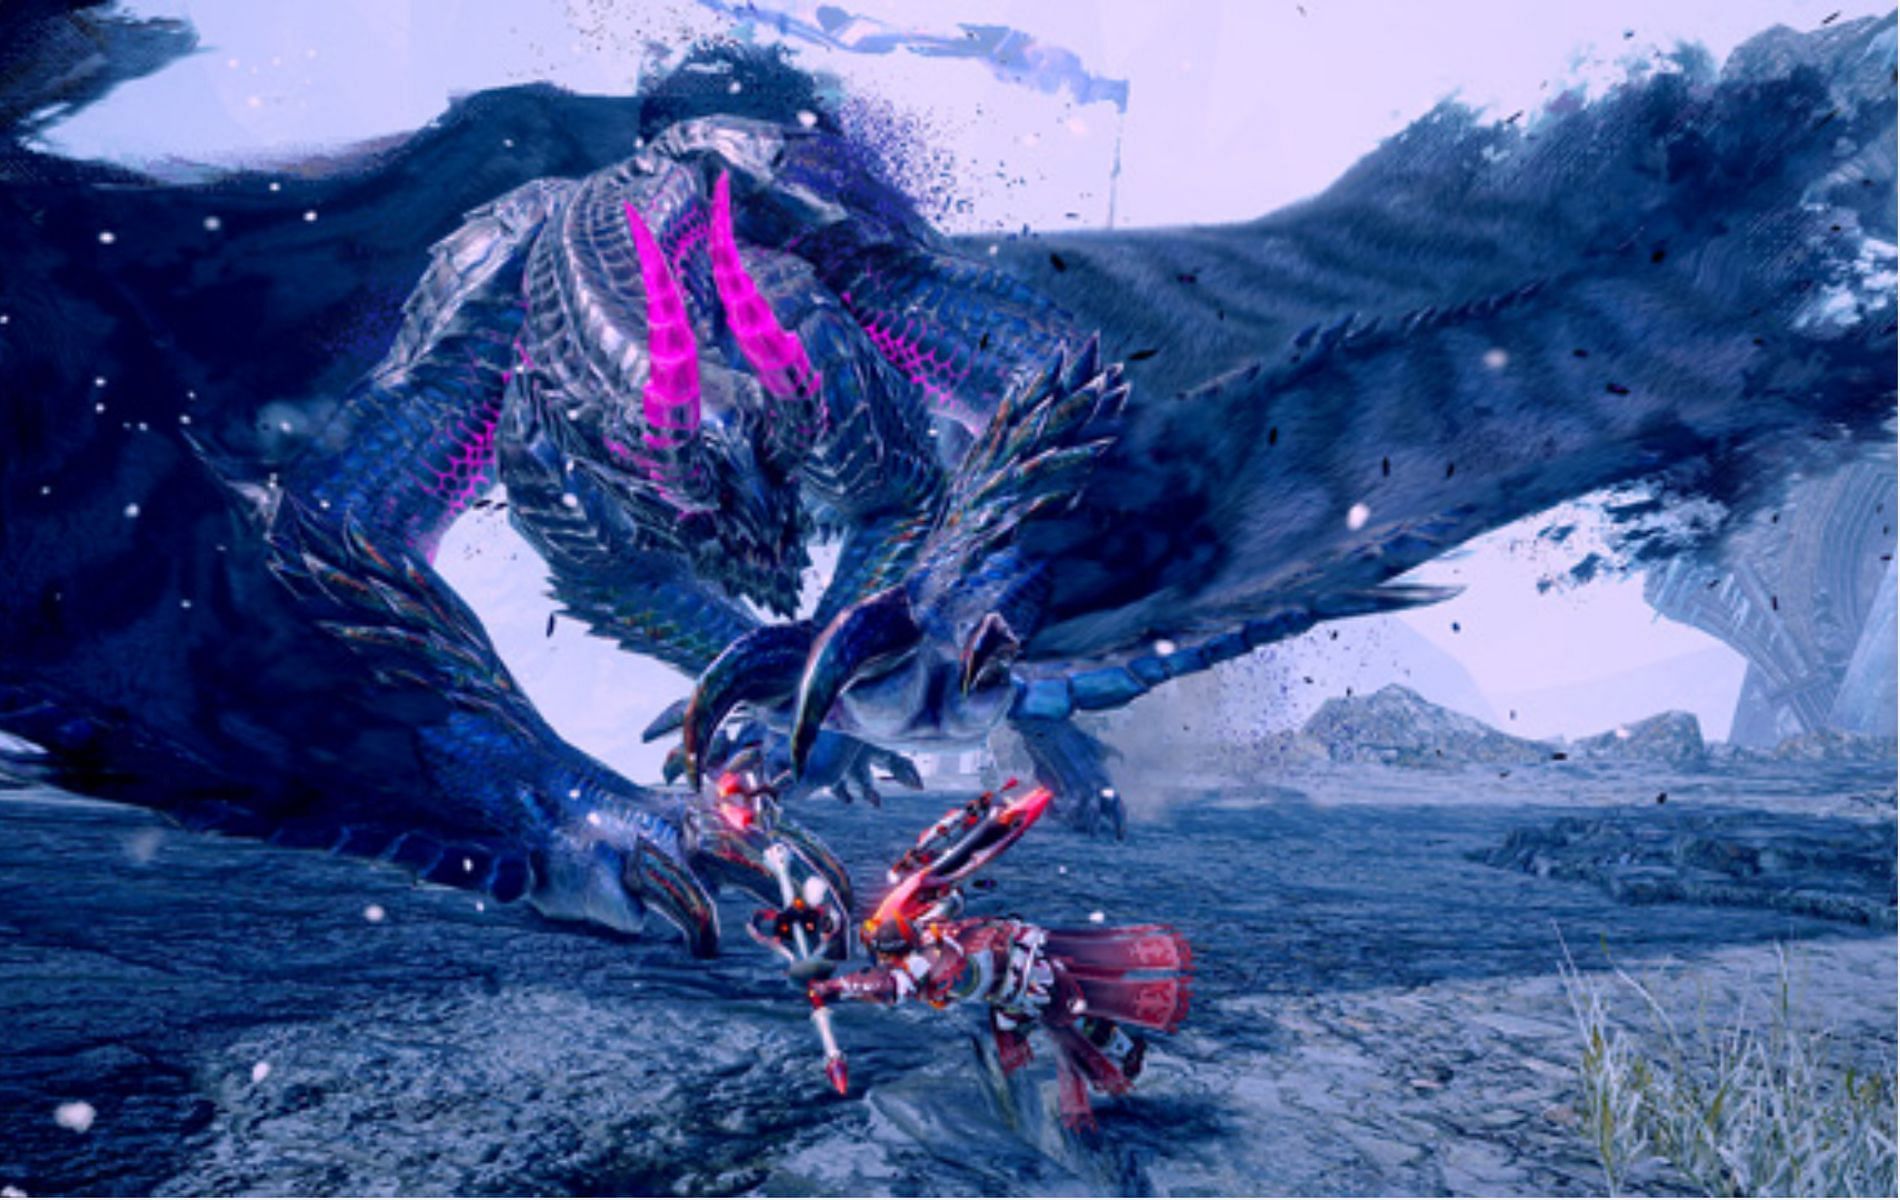 Enraged Gore Magala is one of the most frightening monster transformations in the series (Image via Capcom)